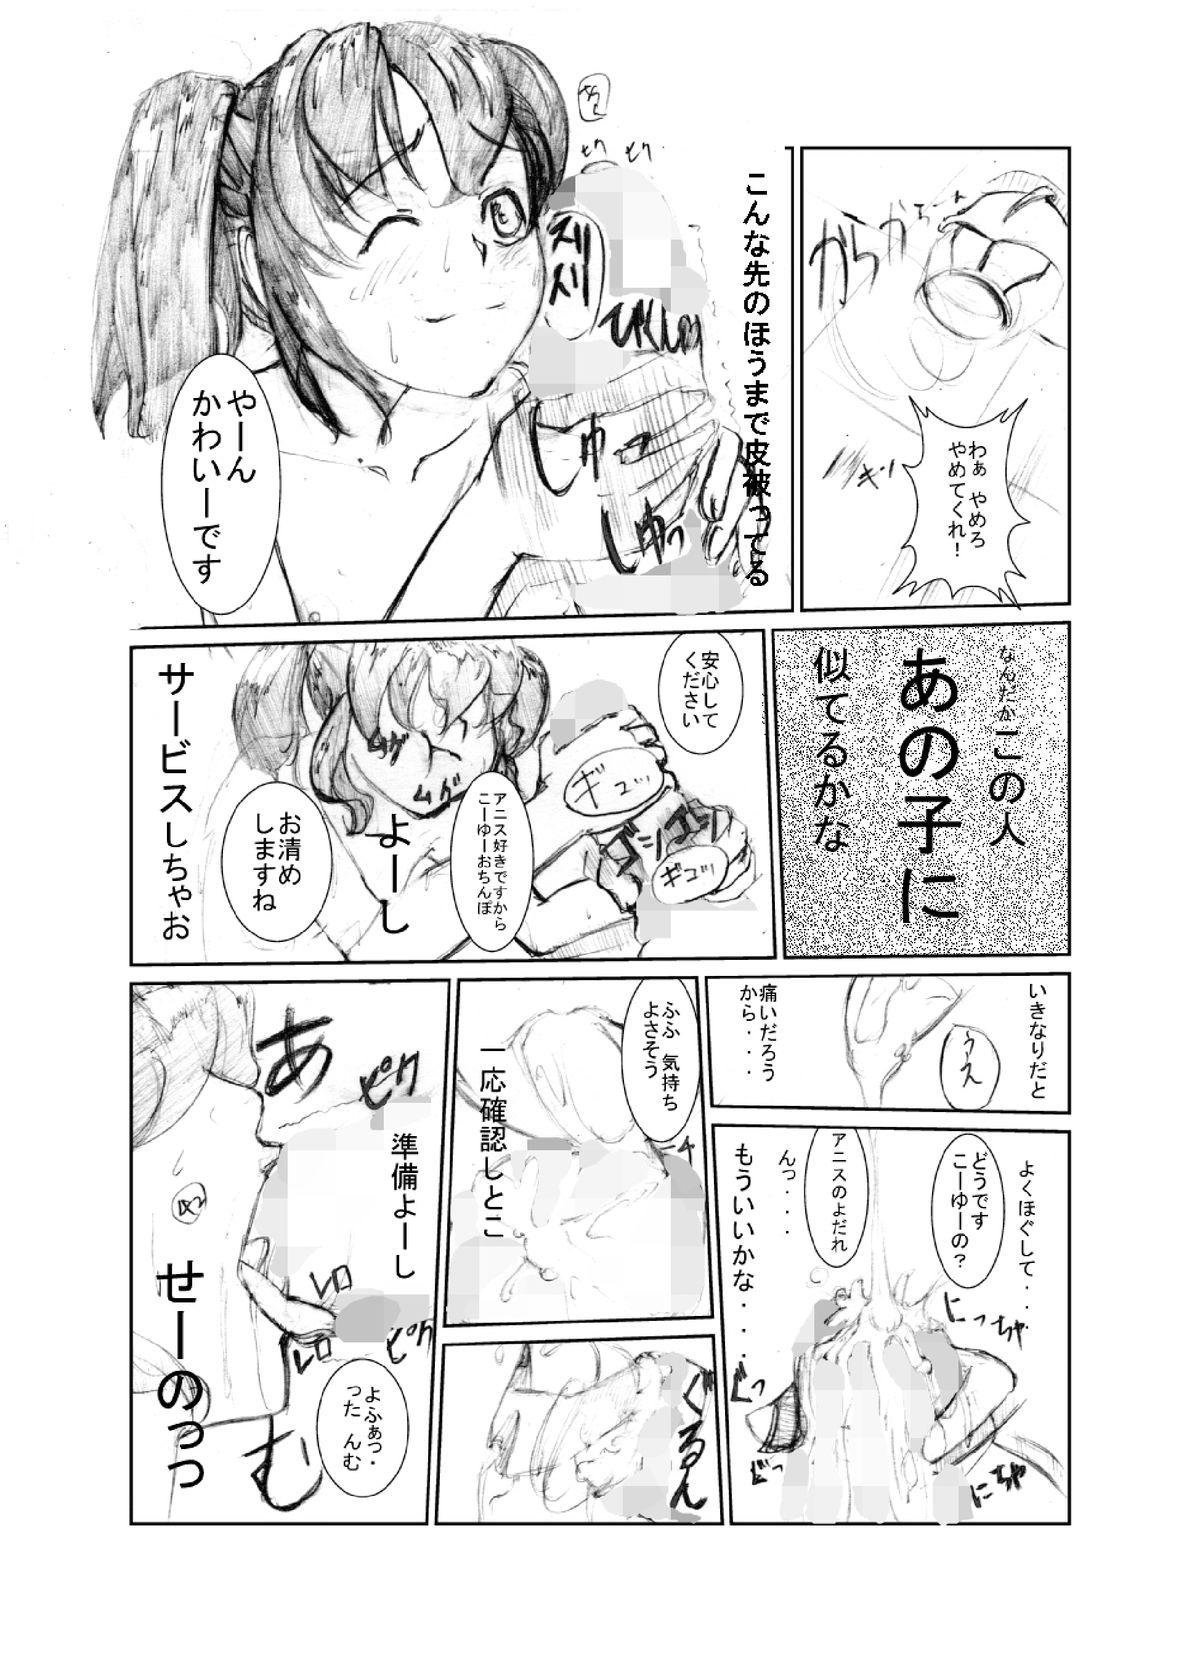 Gay Cash 虹は溶けゆく 朝焼けに - Tales of the abyss English - Page 11